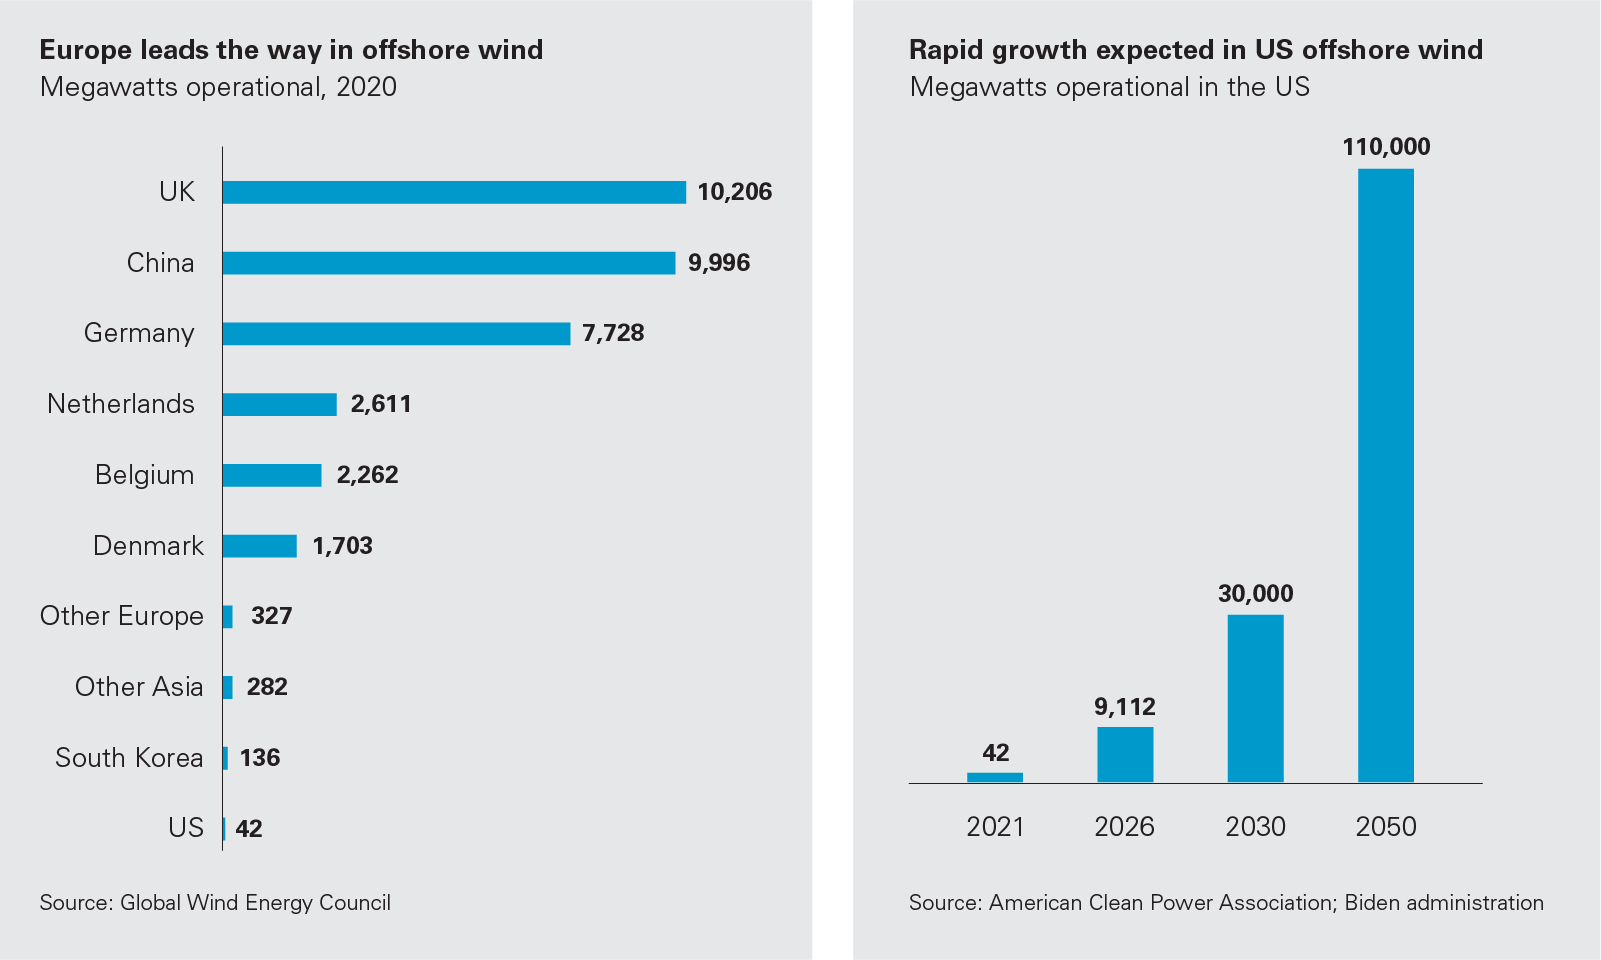 Europe leads the way in offshore wind